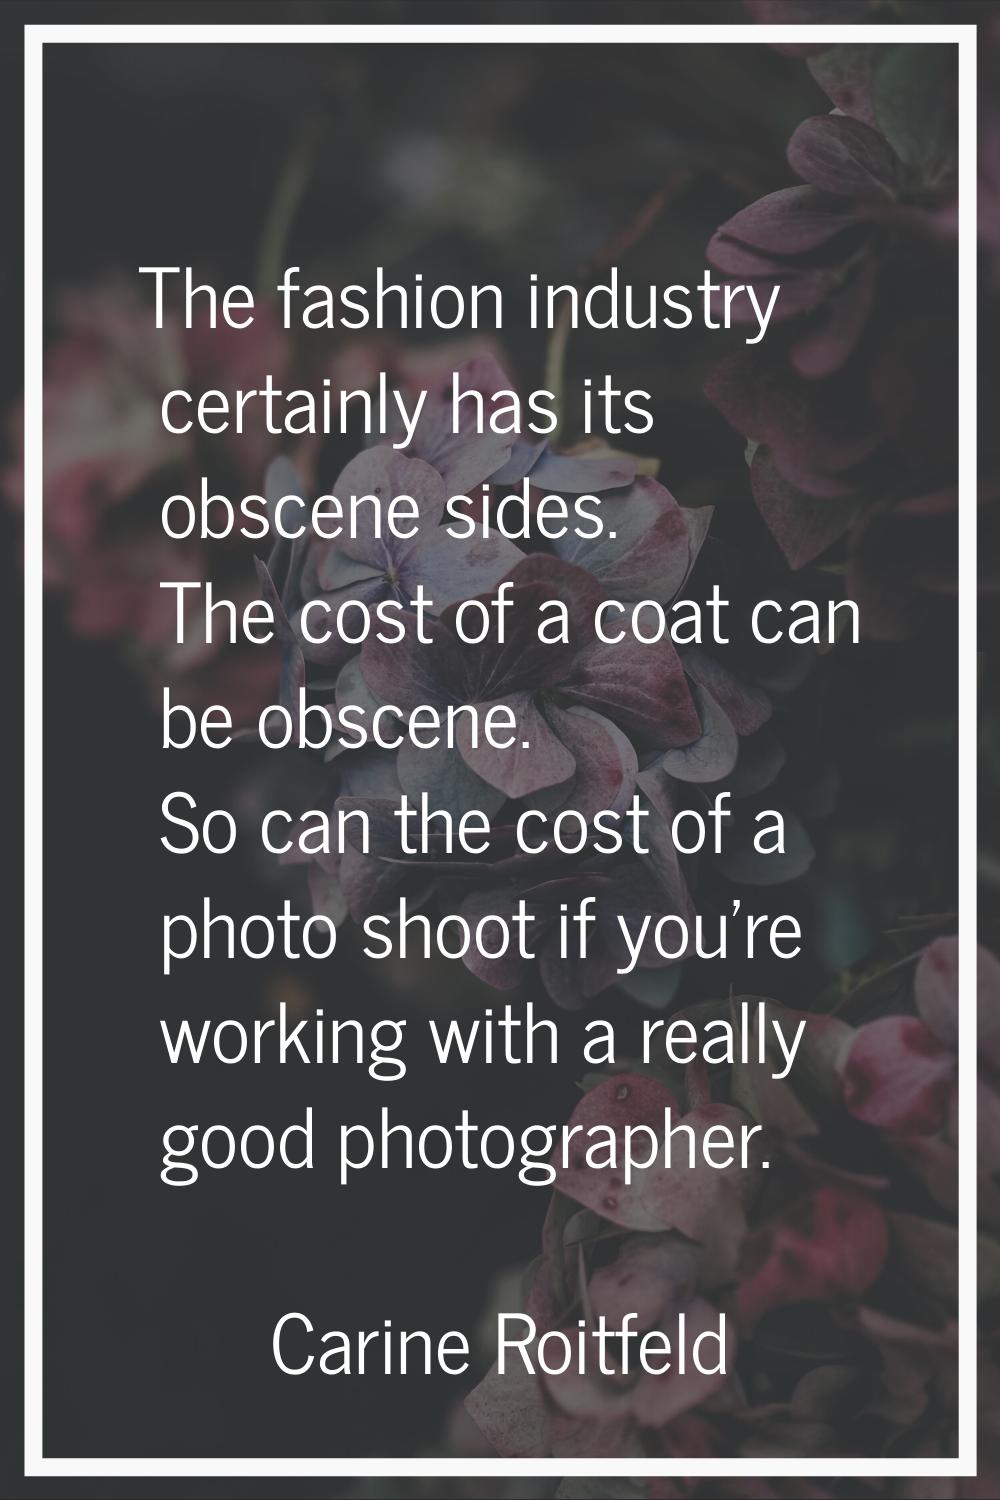 The fashion industry certainly has its obscene sides. The cost of a coat can be obscene. So can the